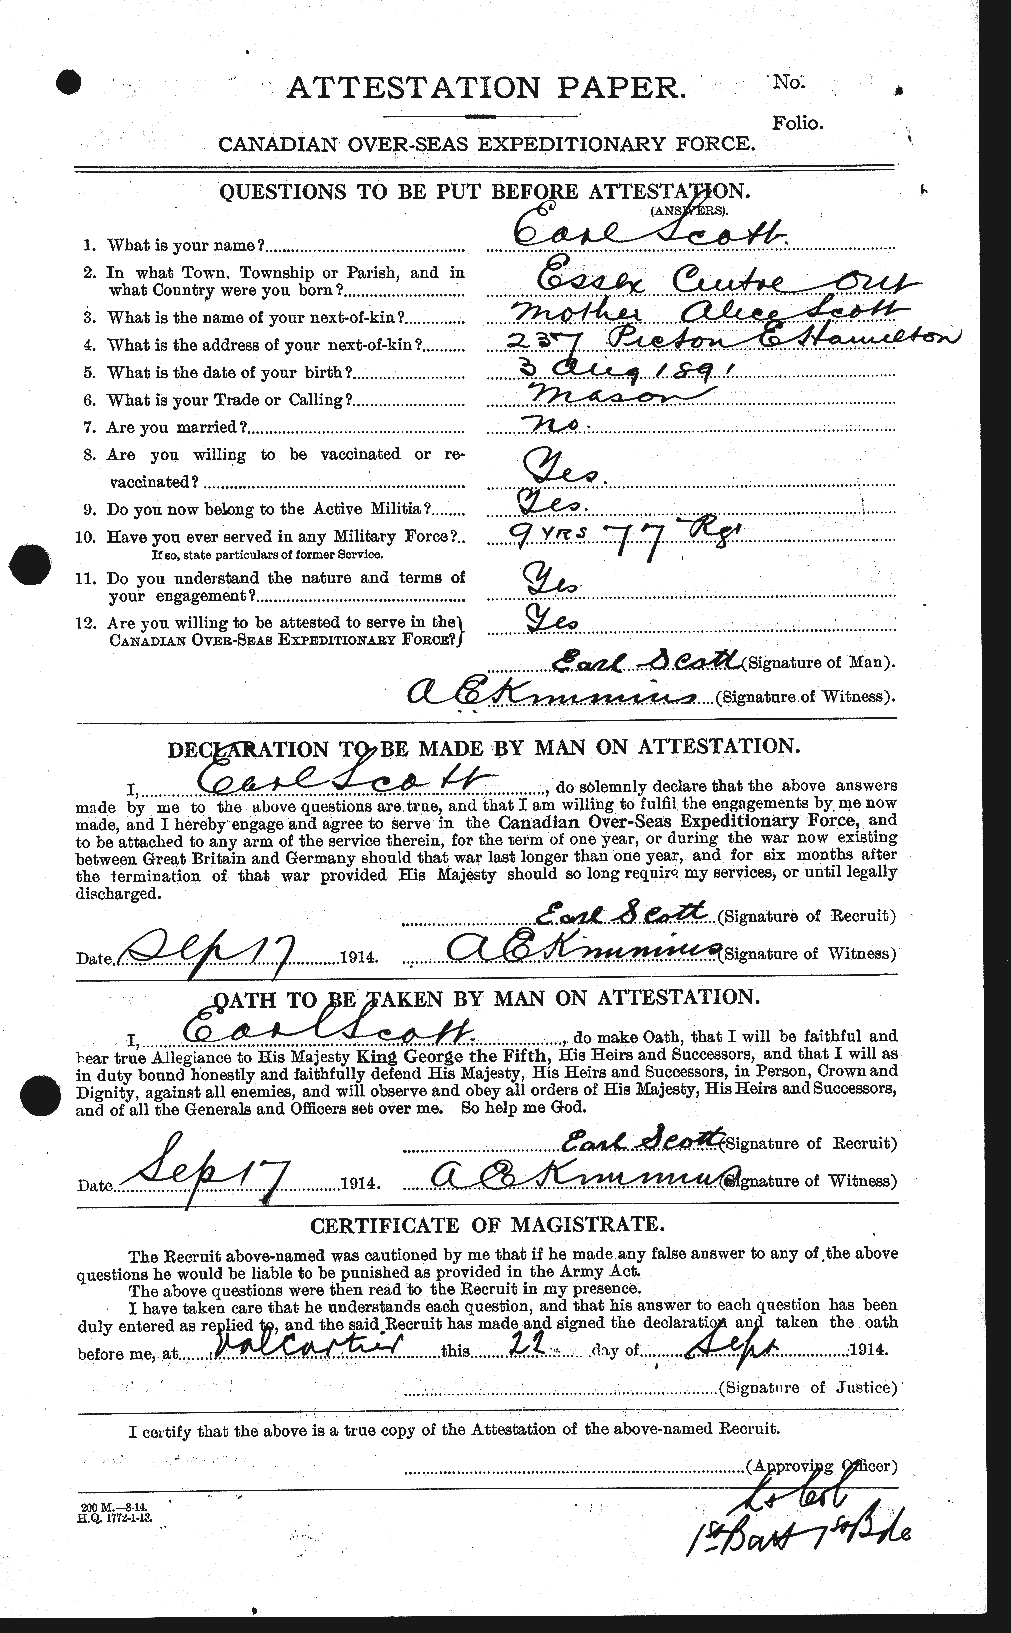 Personnel Records of the First World War - CEF 085342a